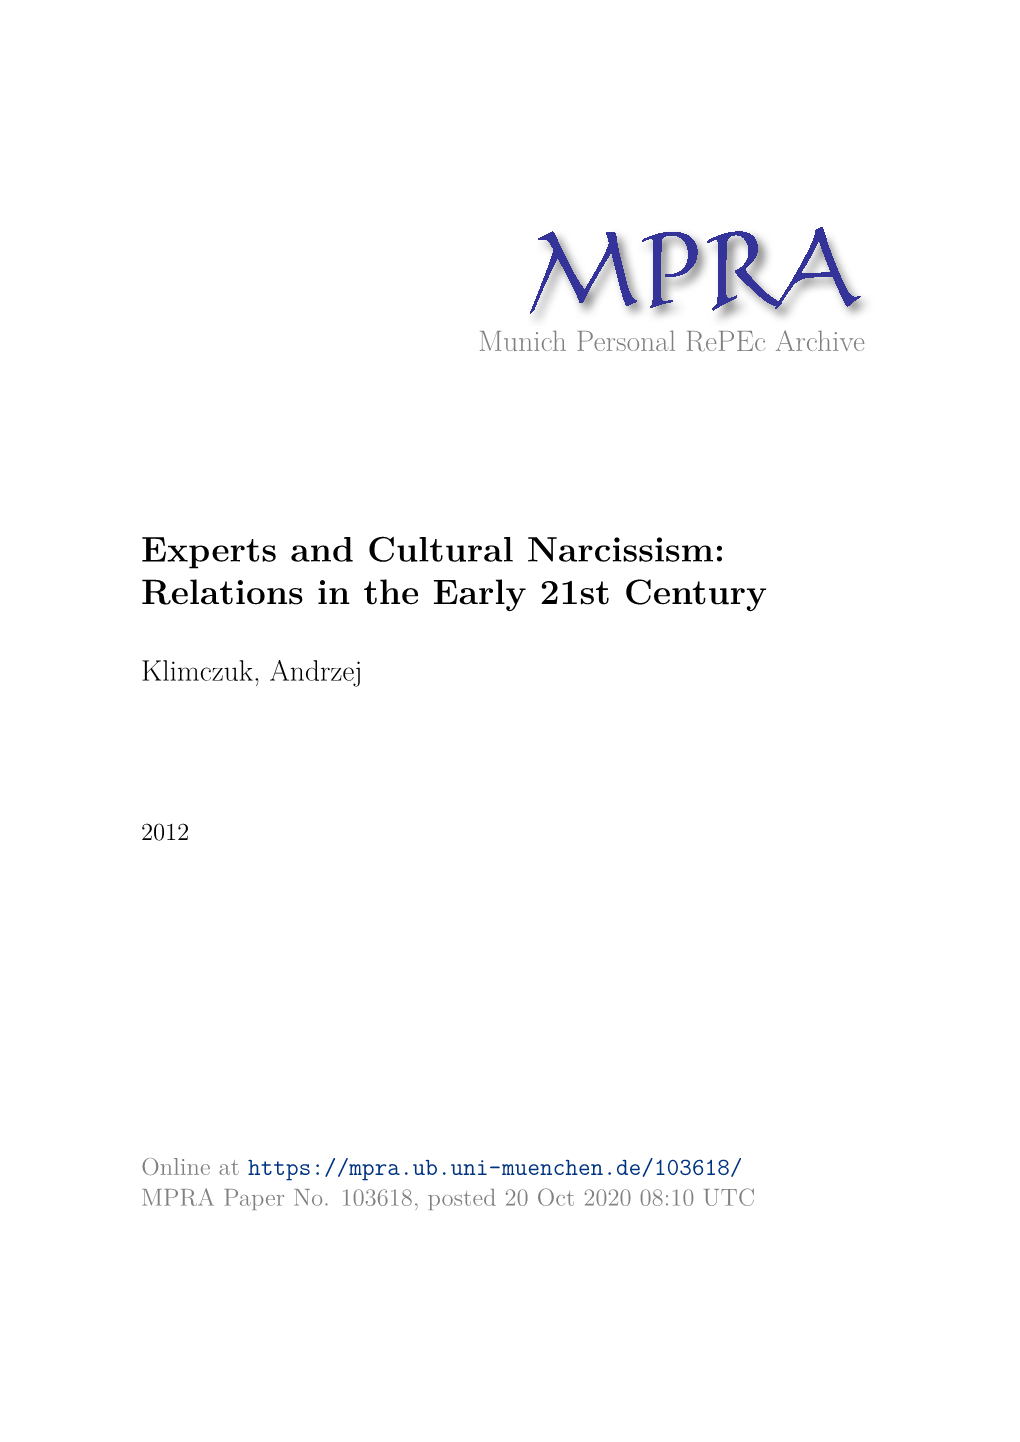 Experts and Cultural Narcissism. Relations in the Early 21St Century